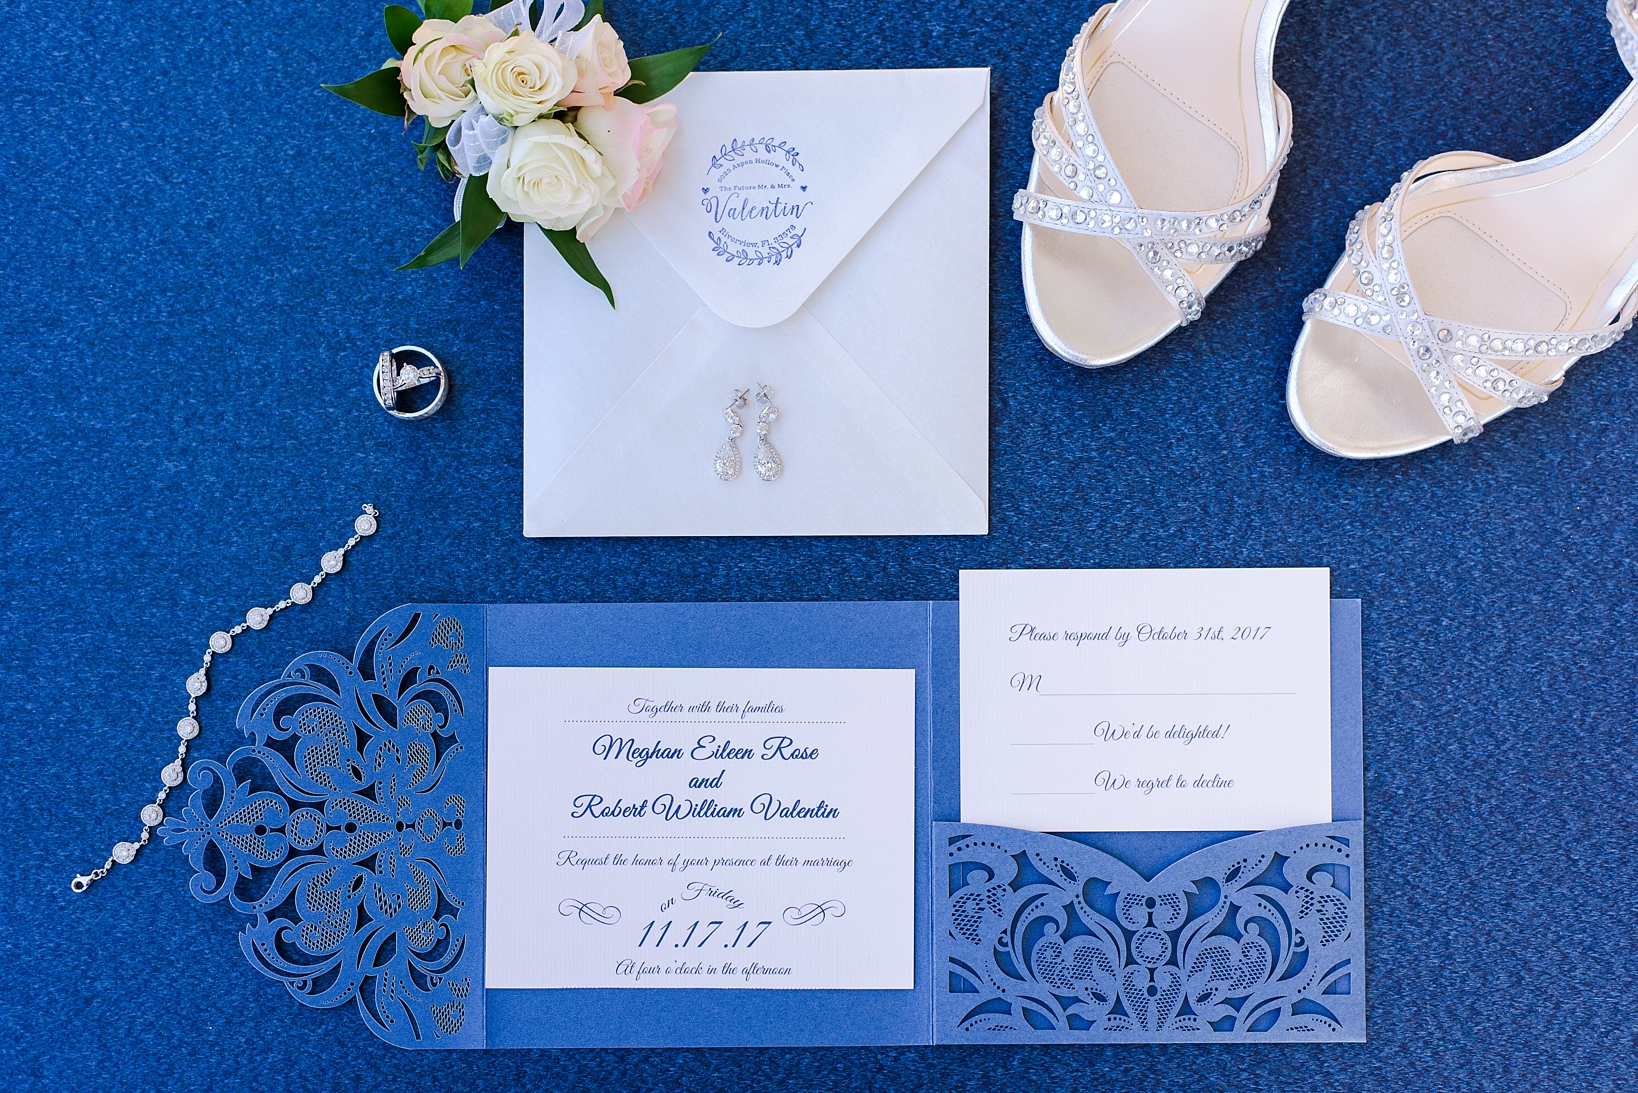 Invitation suite with bridal details by Sarah & Ben Photography